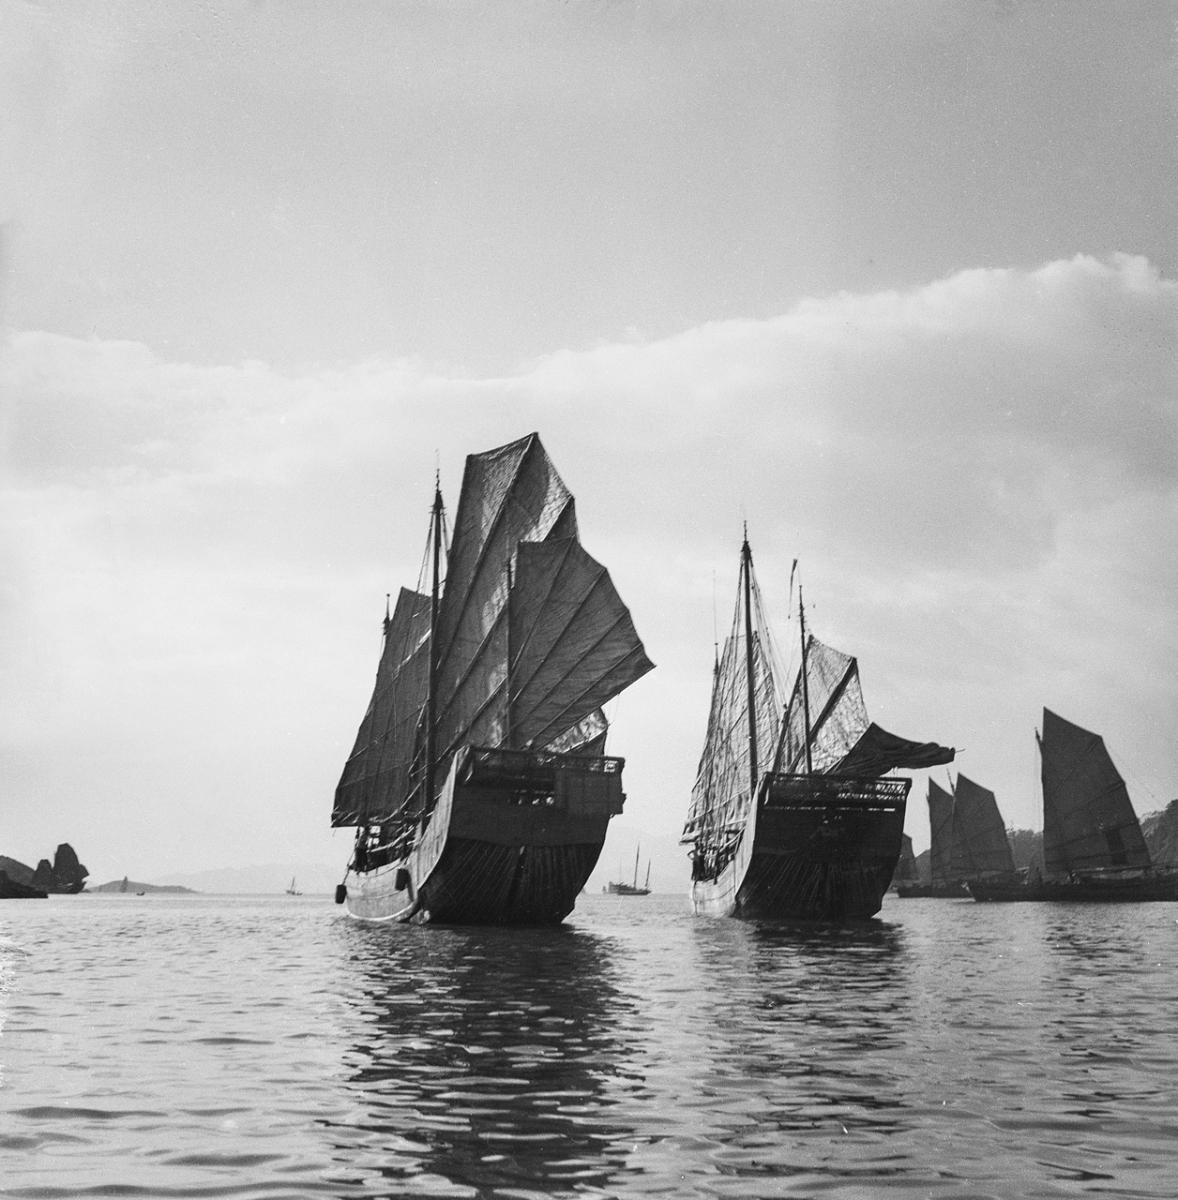 A black and white historic photograph of a Chinese sailing ship